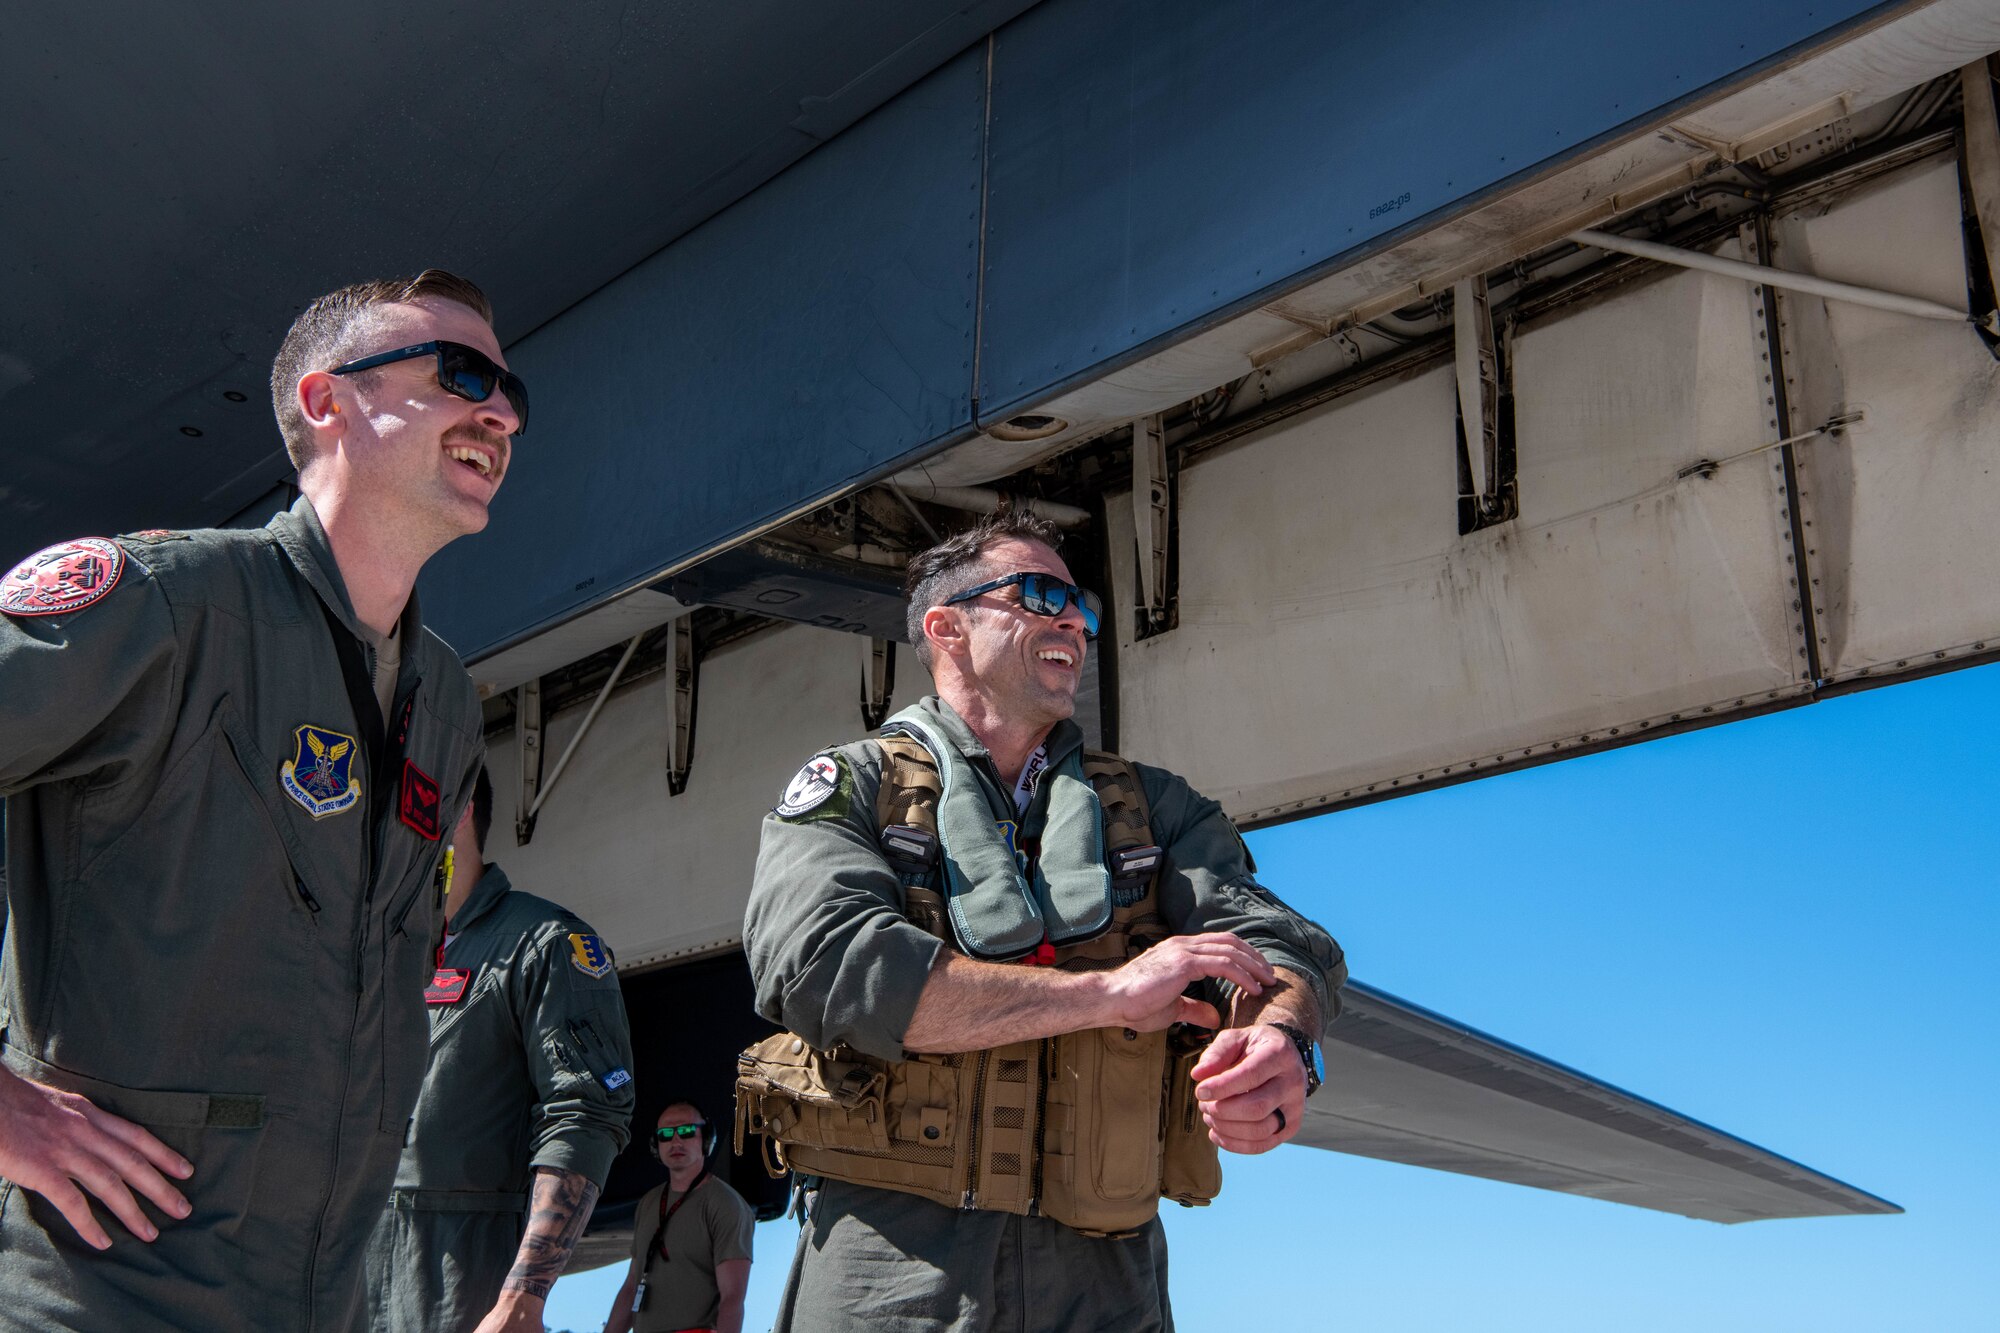 U.S. Air Force Maj. Kristof Lieber (left), the assistant director of operations for the 34th Bomb Squadron, and Lt. Col. Ross Hobbs (right), the commander of the 34th Bomb Squadron, greet each other at Anderson Air Force Base, Guam, after landing a B-1B Lancer for a Bomber Task Force mission on June 2, 2022.